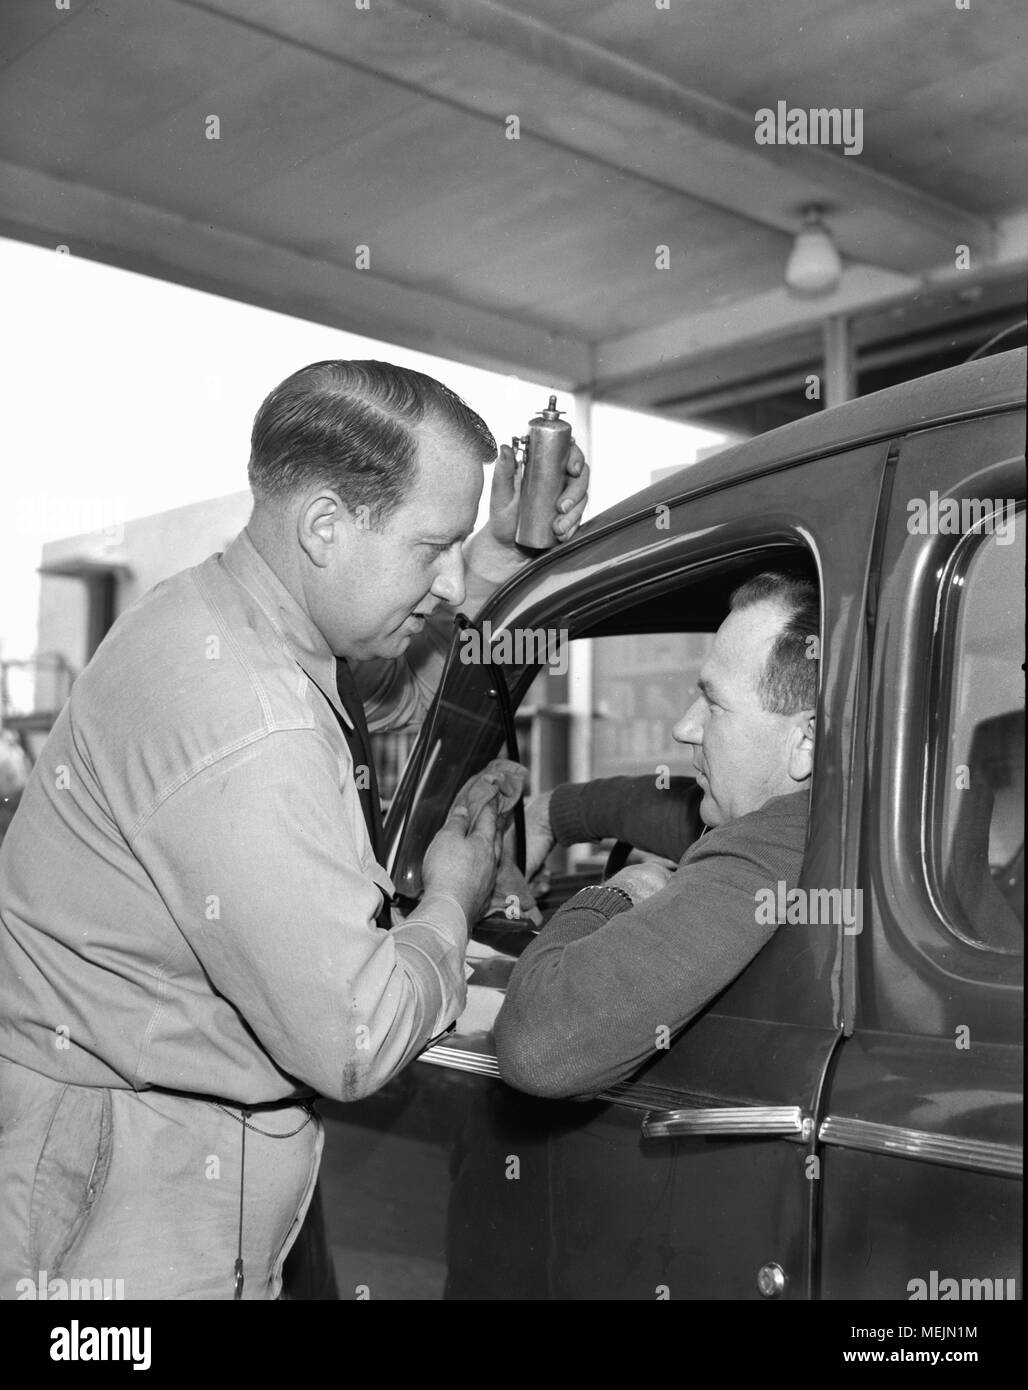 A service station attendant assists a car owner in Southern California, ca. 1946. Stock Photo